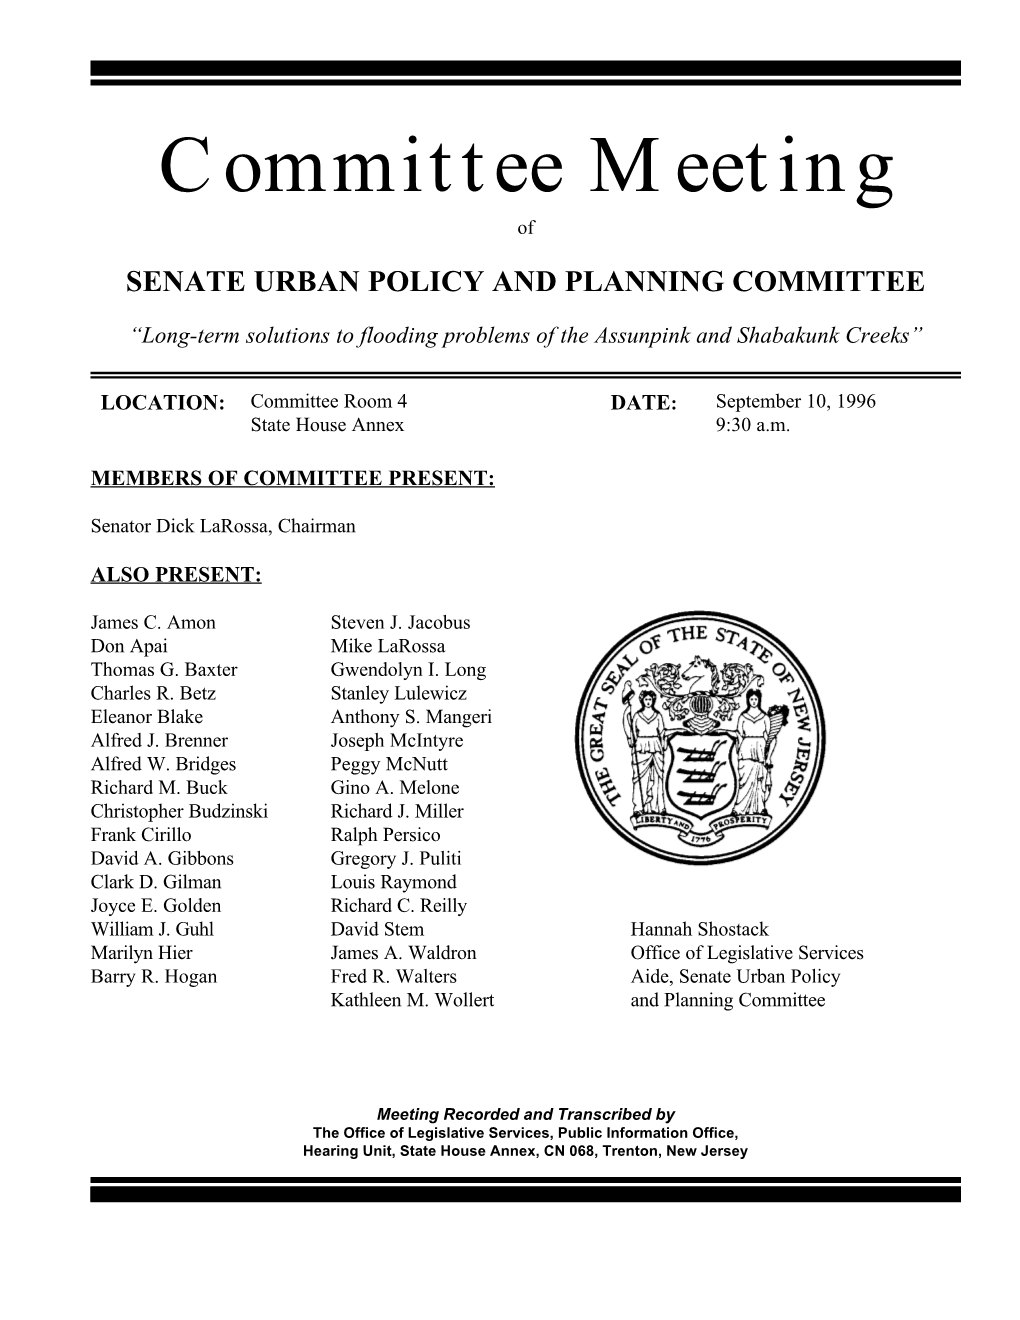 Committee Meeting of SENATE URBAN POLICY and PLANNING COMMITTEE